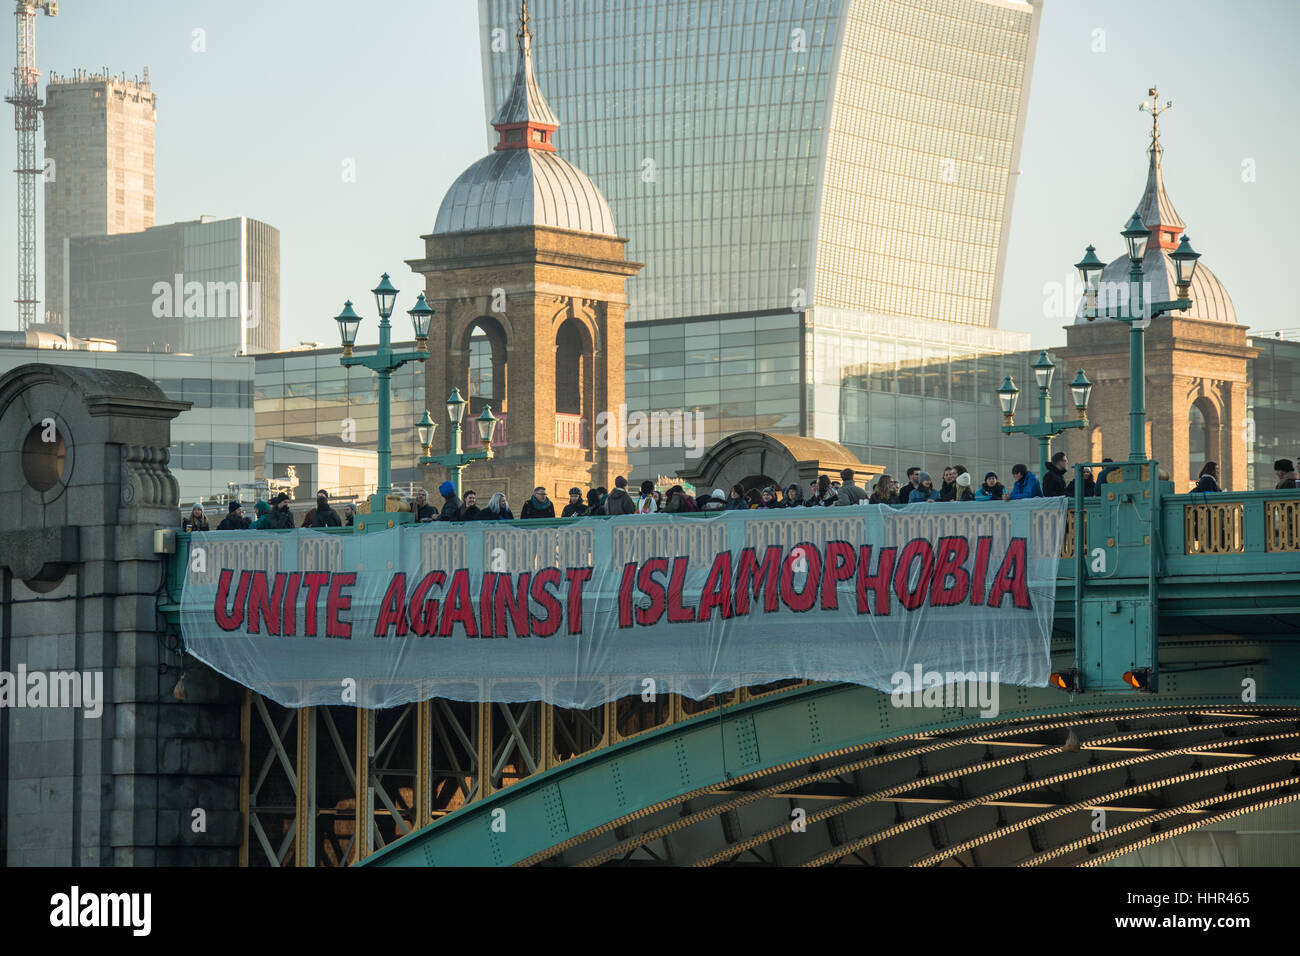 London, UK. 20 January, 2017. On the eve of Donald Trumps inauguration as the 45th President of the United States of America, and in defiance of his politics of hate and division, ’Bridges not walls’ dropped banners from many bridges around the World including Blackfriars Bridge in London. David Rowe/Alamy Live News Stock Photo